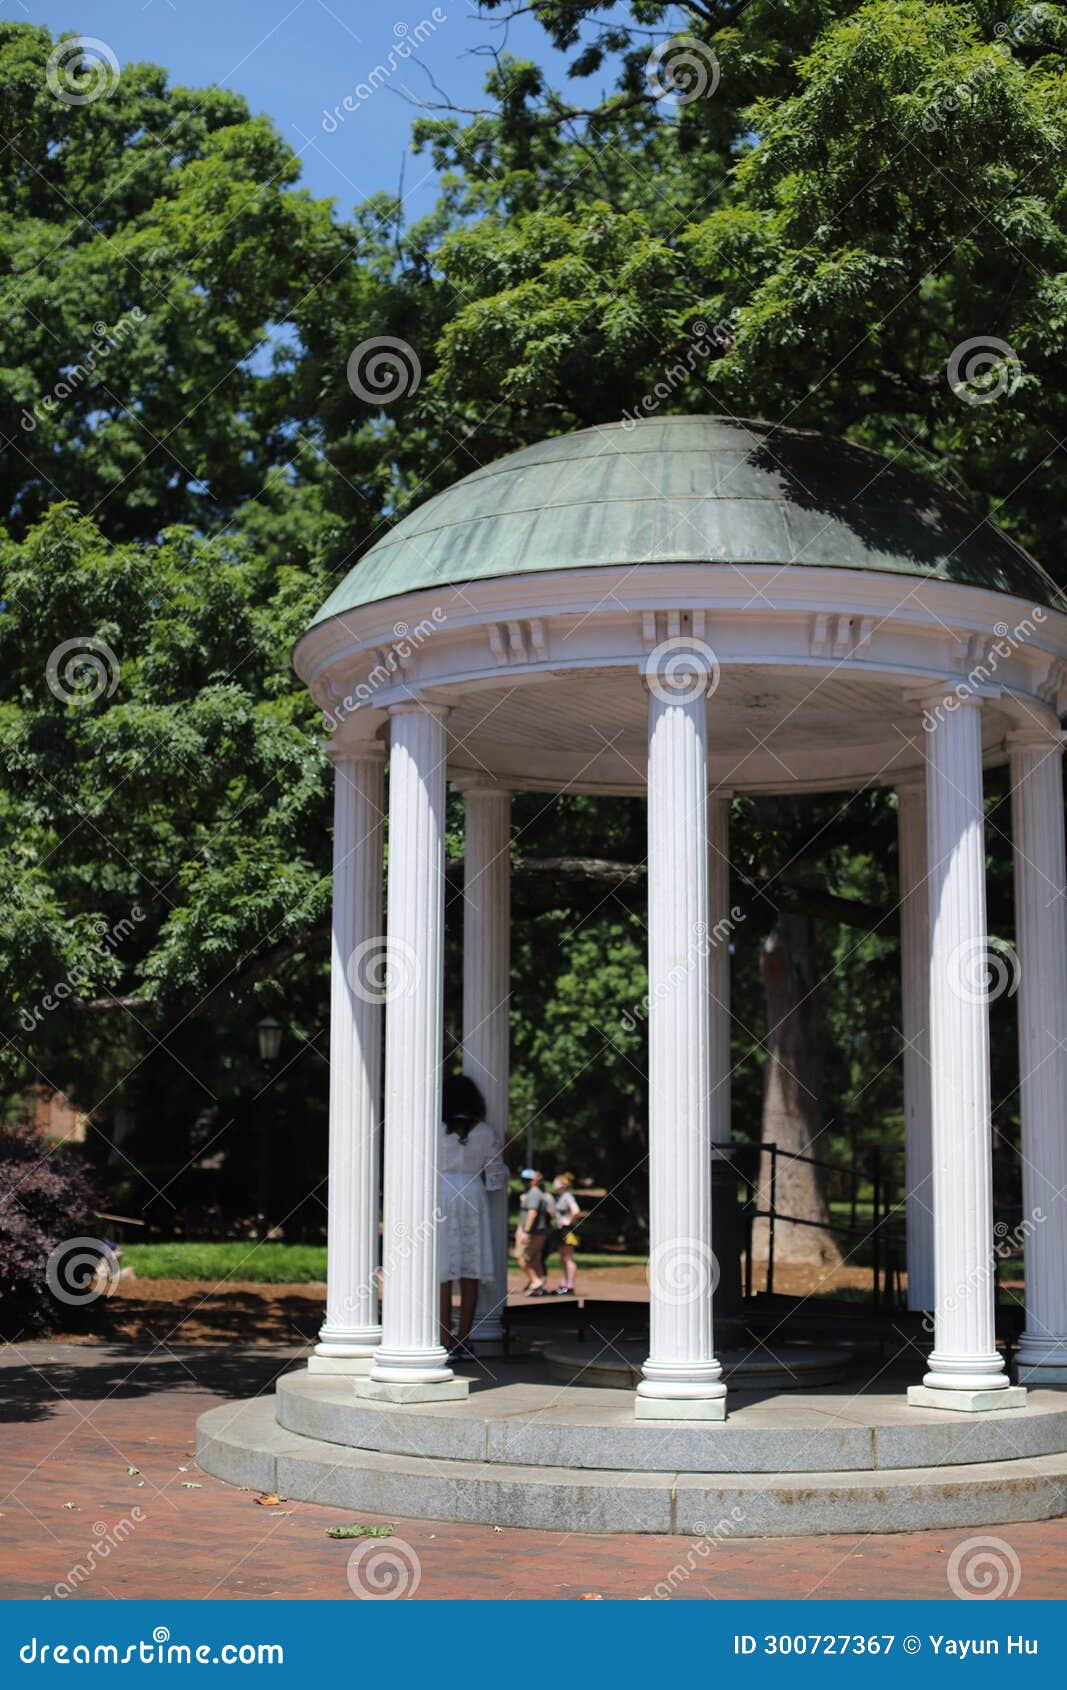 unc-chapel hill old well